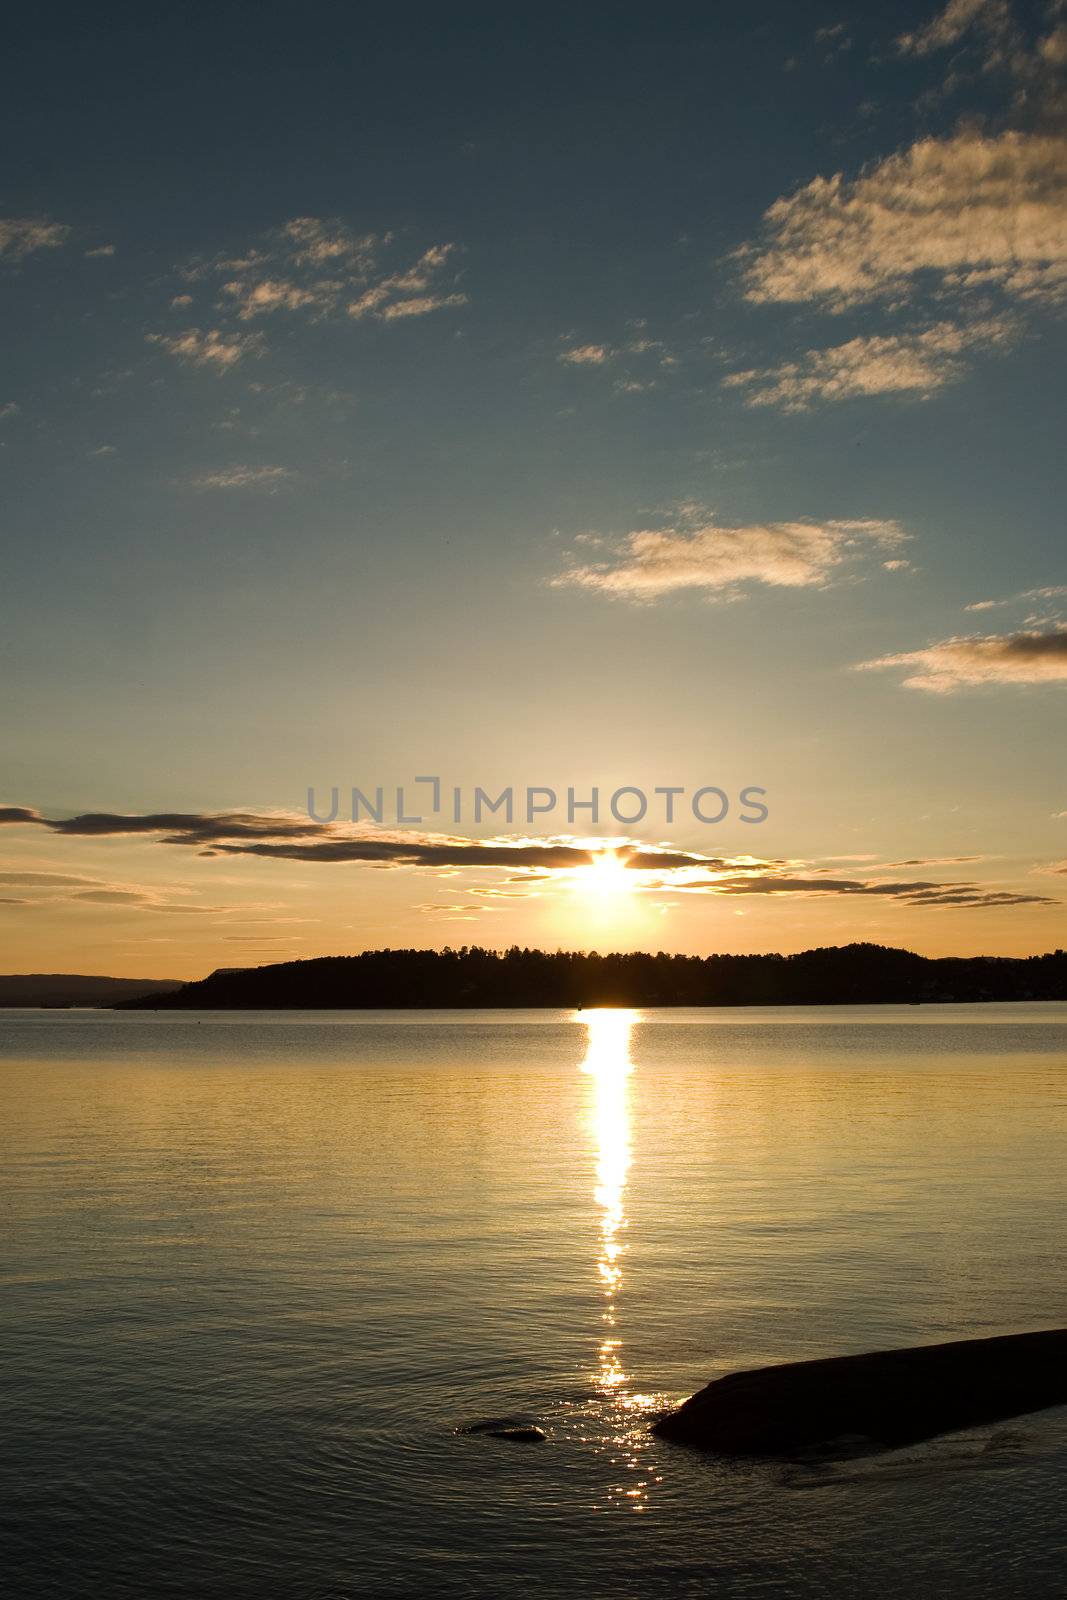 A sunset on the oslo fjord, Norway